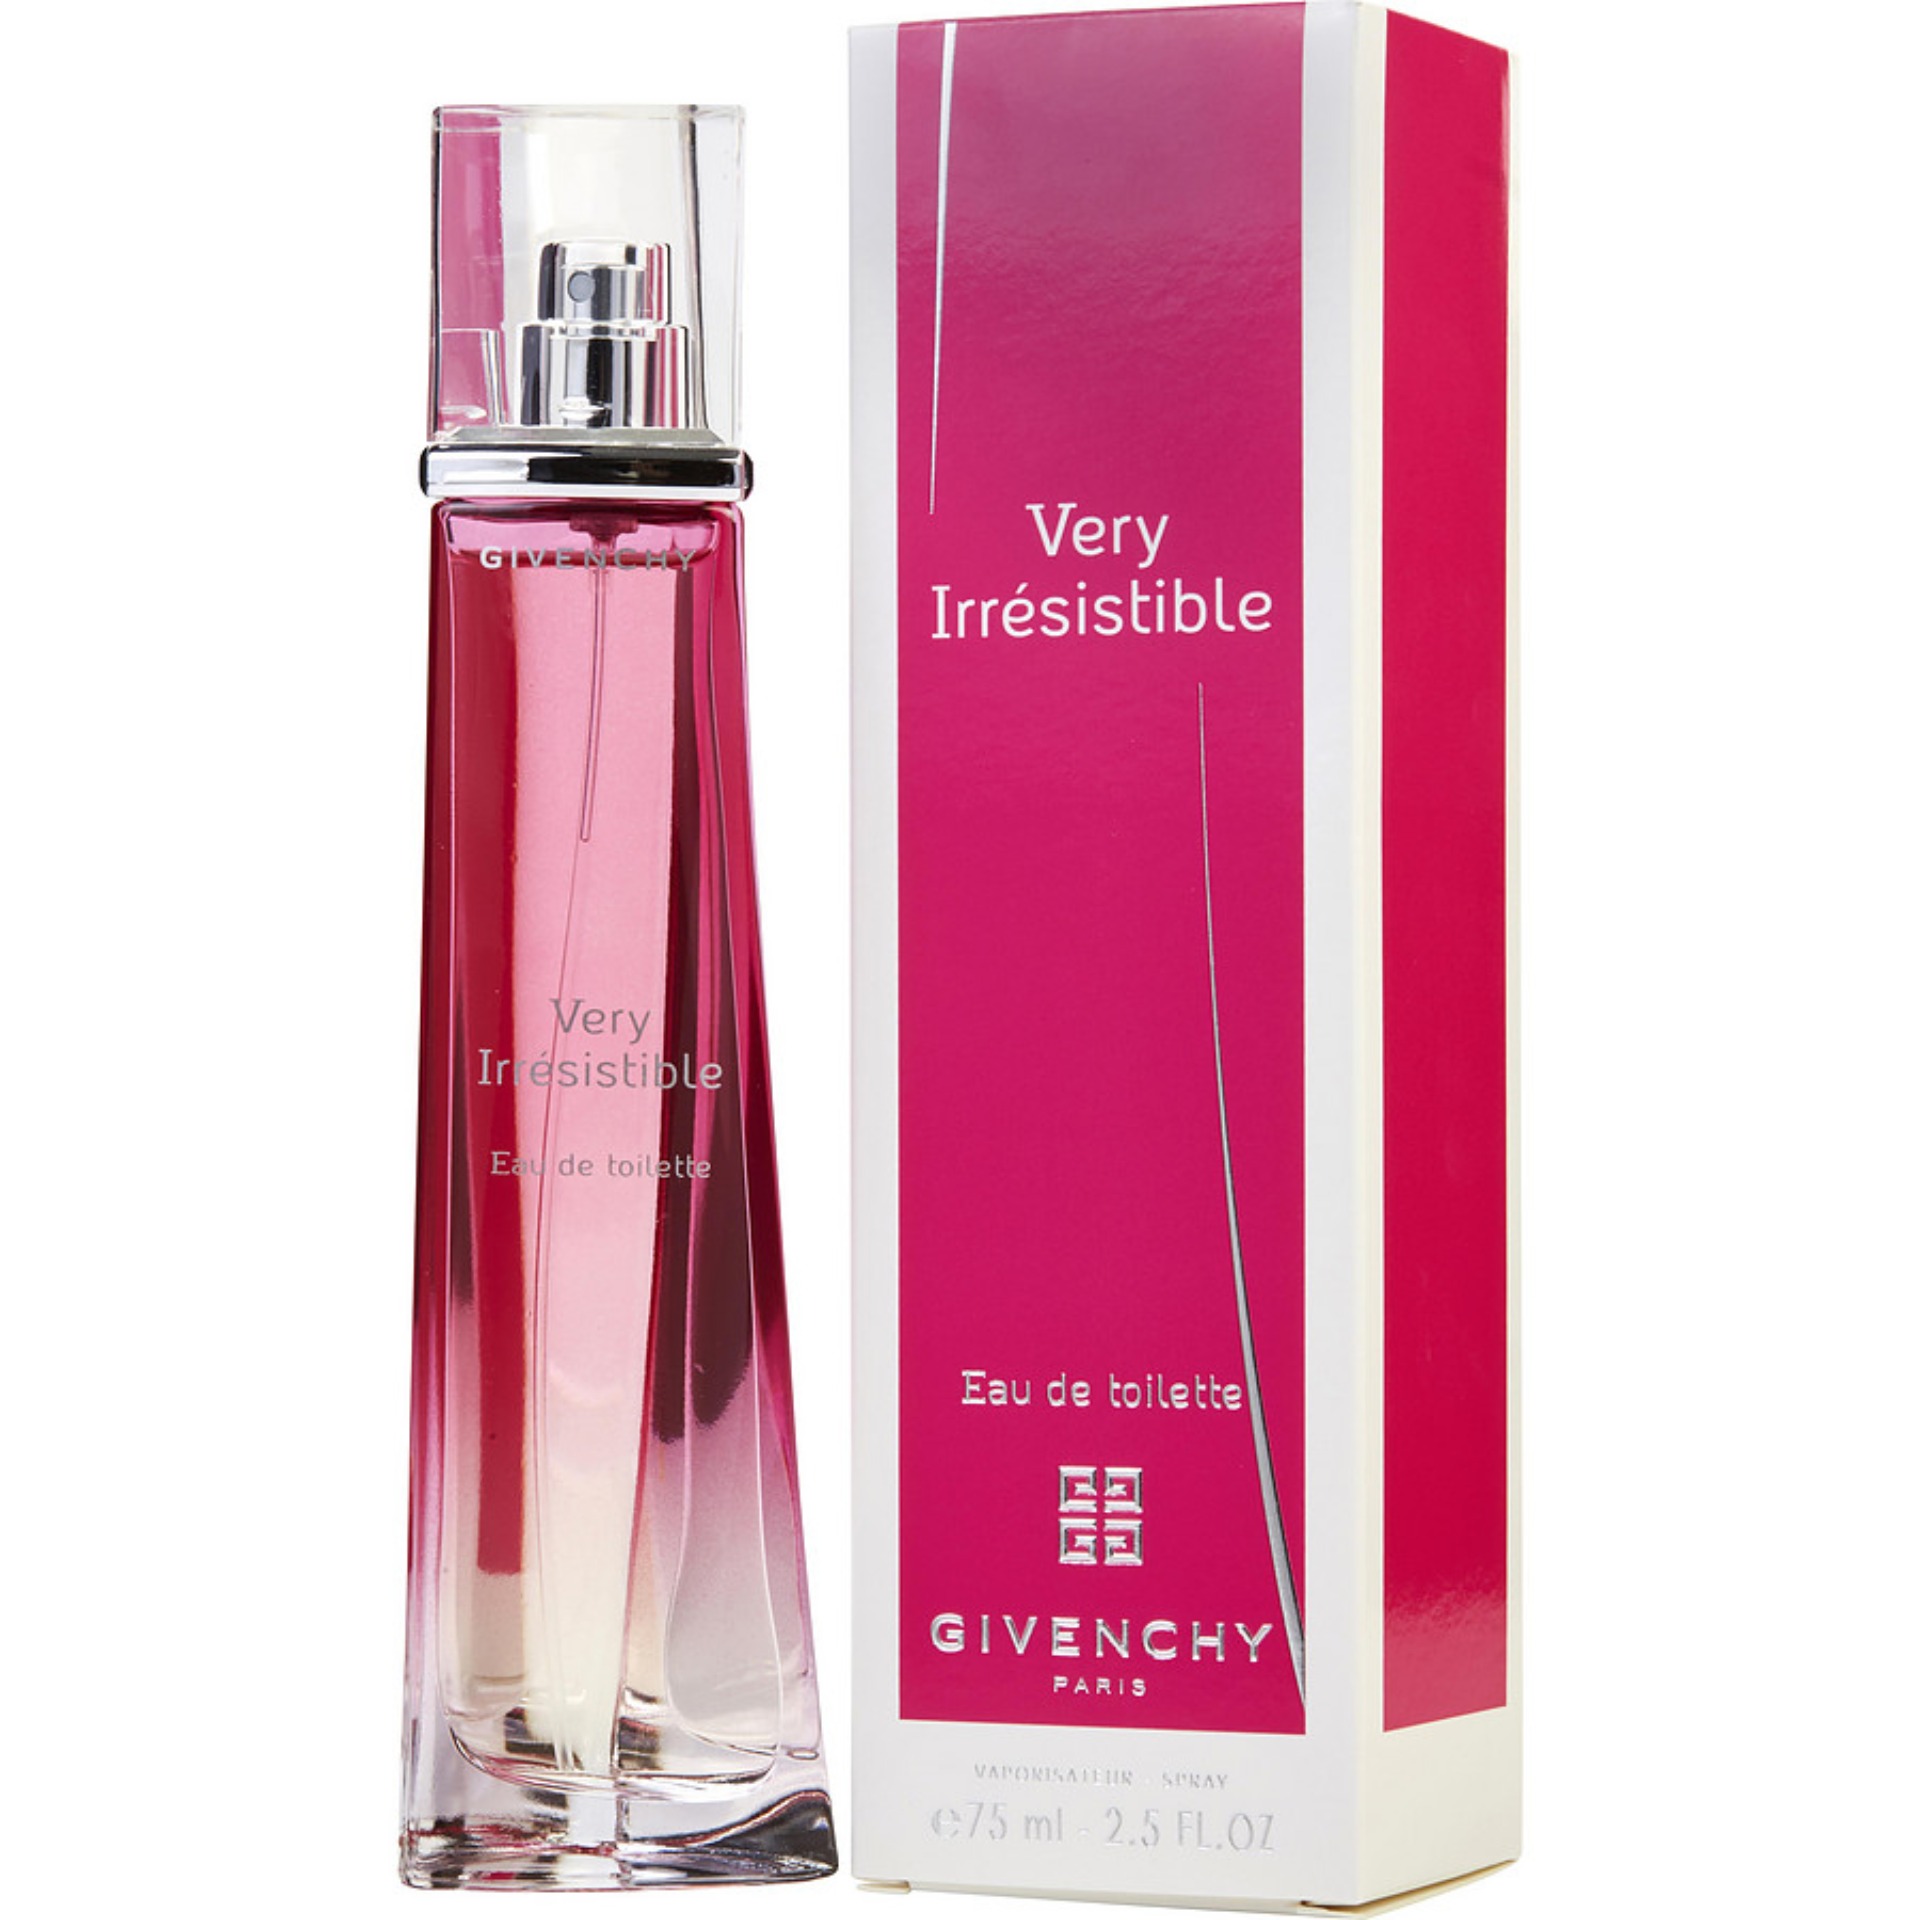 Givenchy irresistible toilette. Givenchy very irresistible Eau de Toilette. Givenchy very irresistible women EDT 30 ml. Very irresistible Givenchy женские. Givenchy very irresistible Eau de Toilette 75 ml.